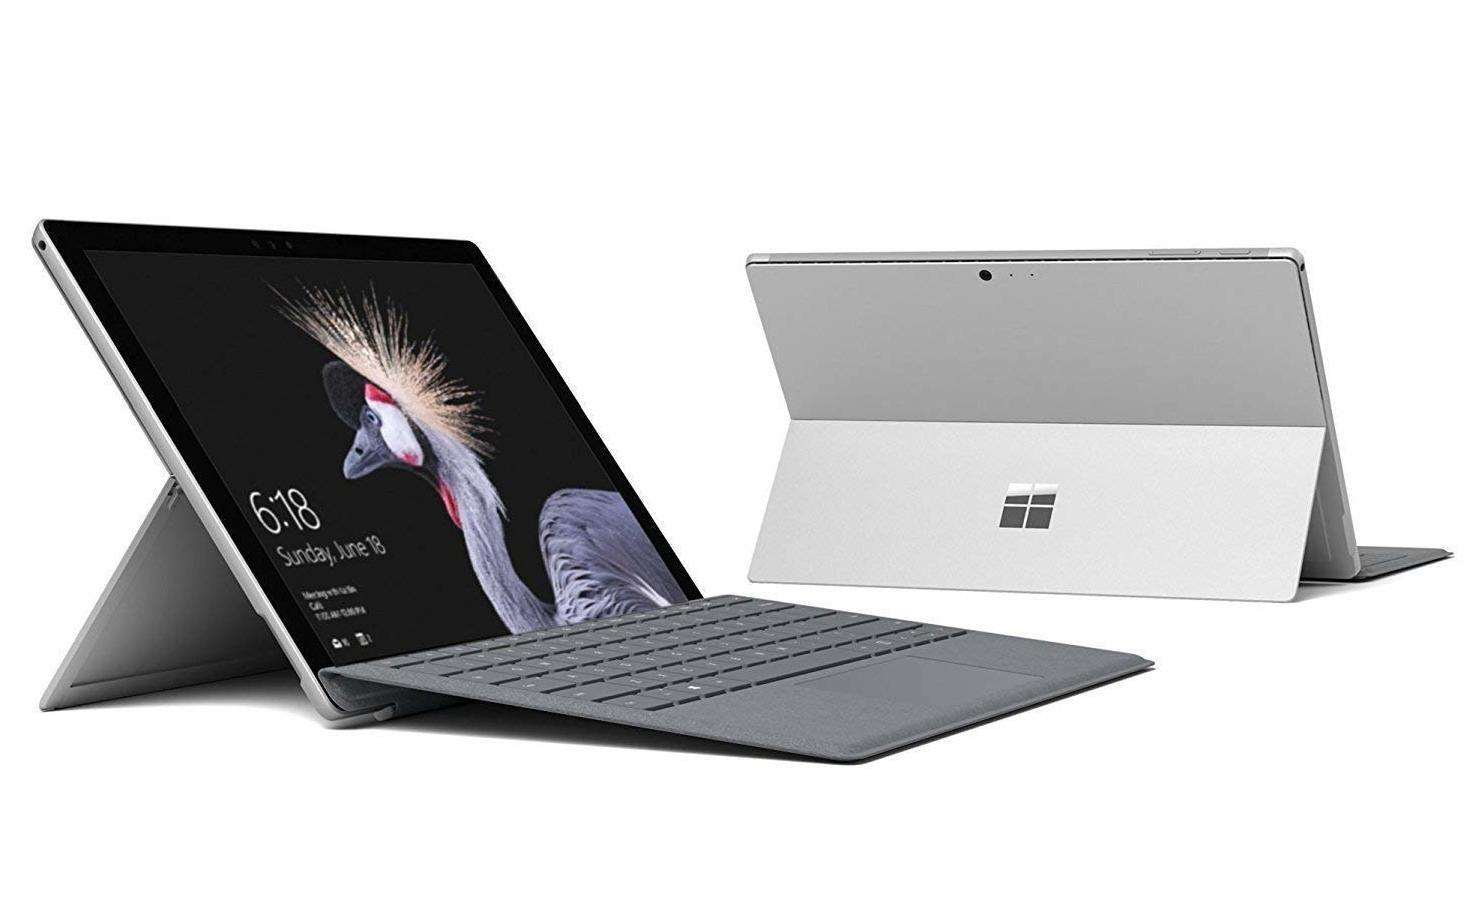 The Microsoft Surface Pro 12.3-Inch Laptop was one of the most popular deals by Amazon